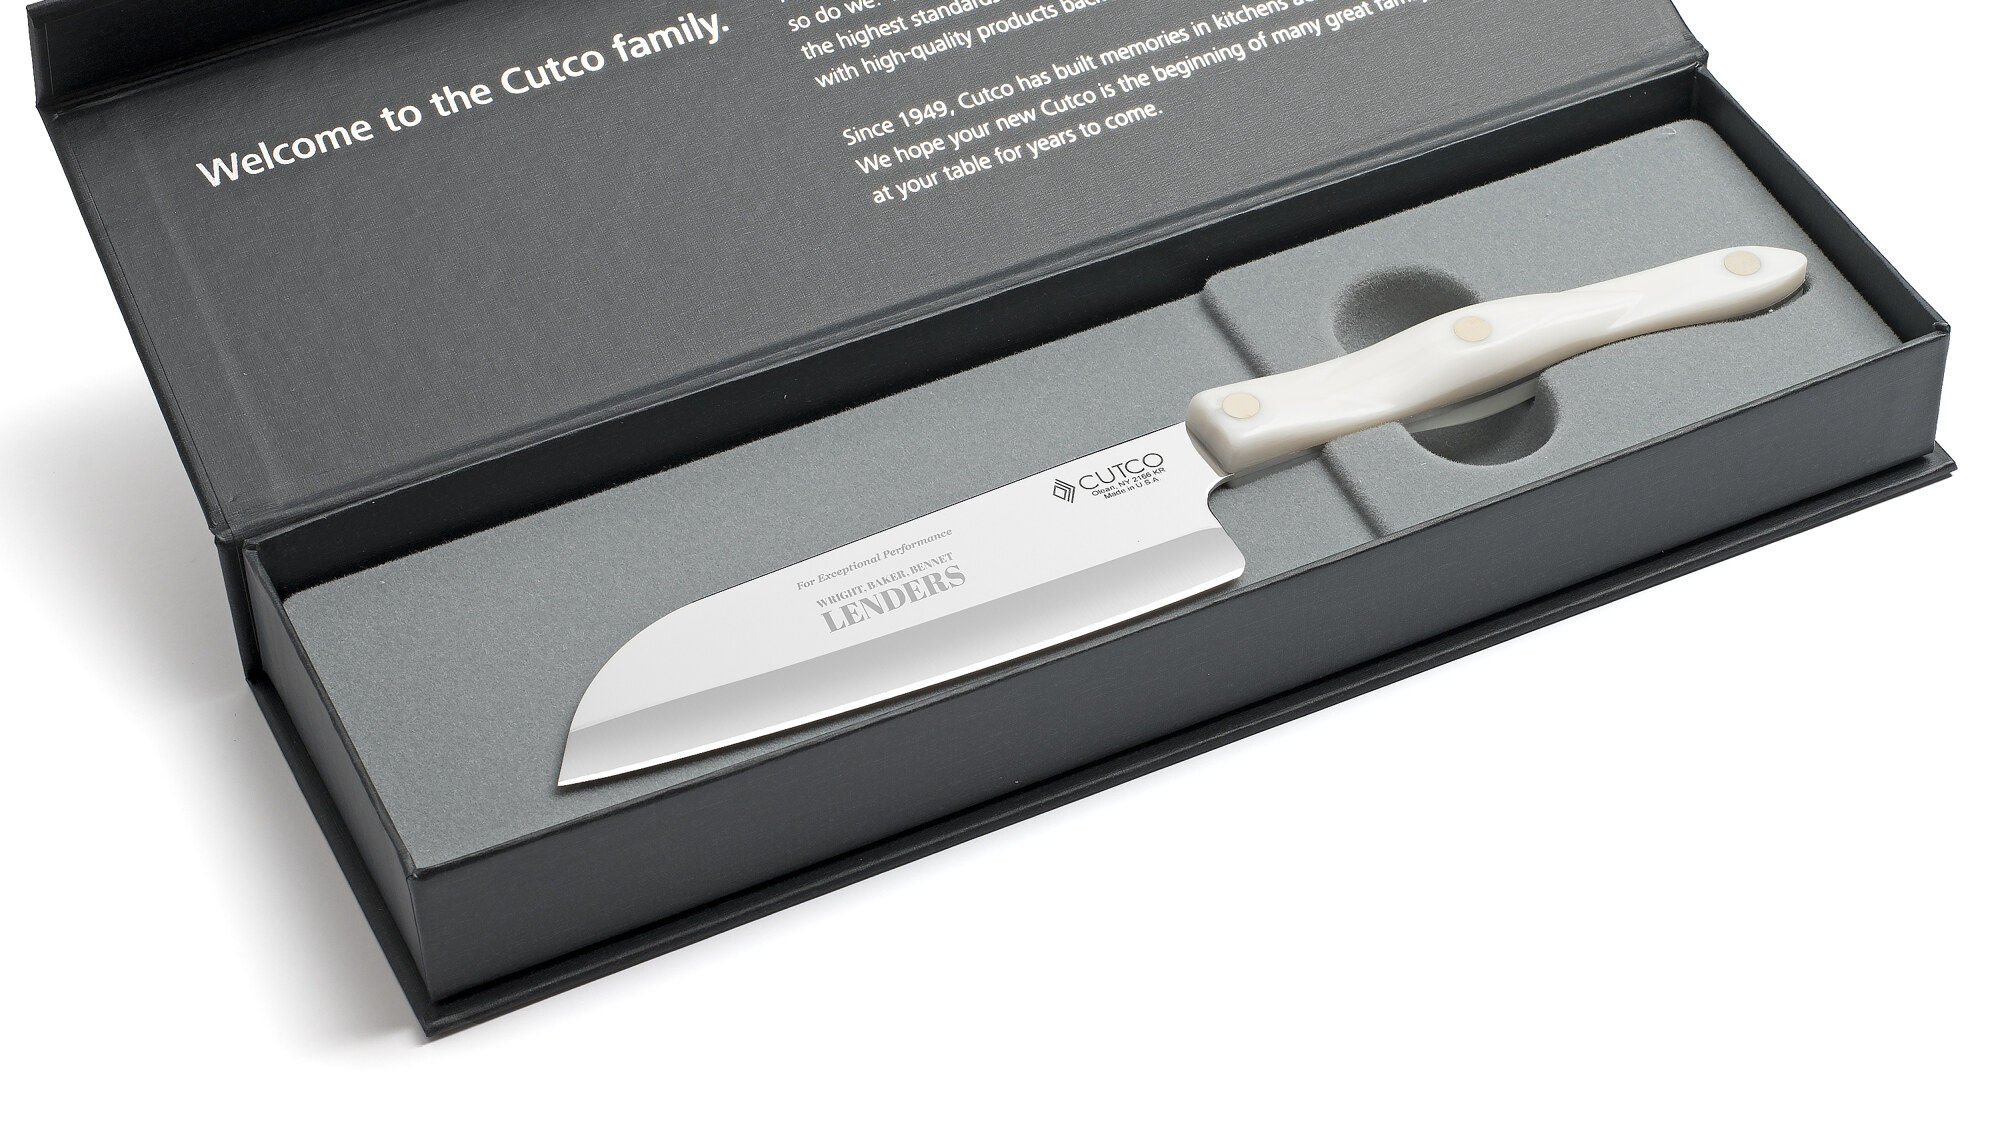 2 Products - 5" Petite Santoku Product in Deluxe Gift Box